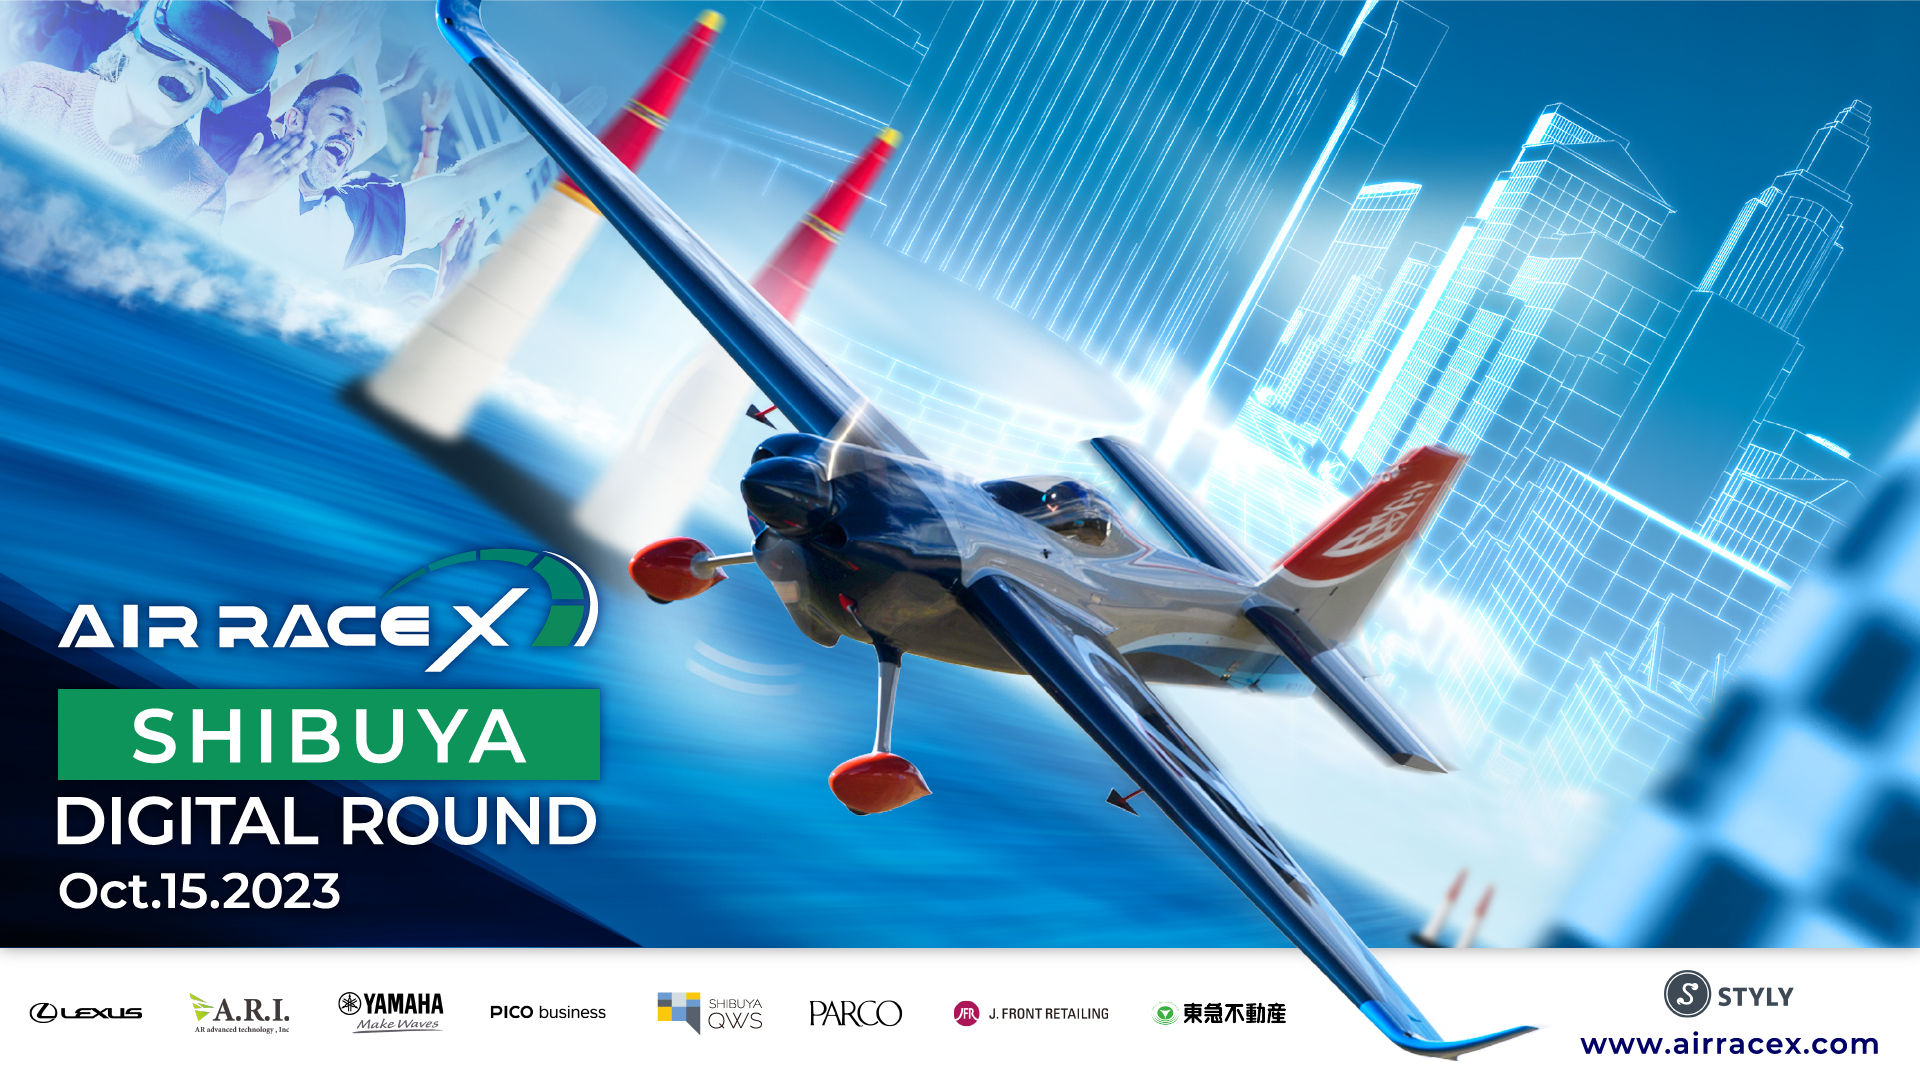 F1 of the sky, Air Race X to be held in Shibuya using AR.
        October 15 (Sun.) Digital Round Final Tournament in Shibuya
        AIR RACE X - SHIBUYA DIGITAL ROUND